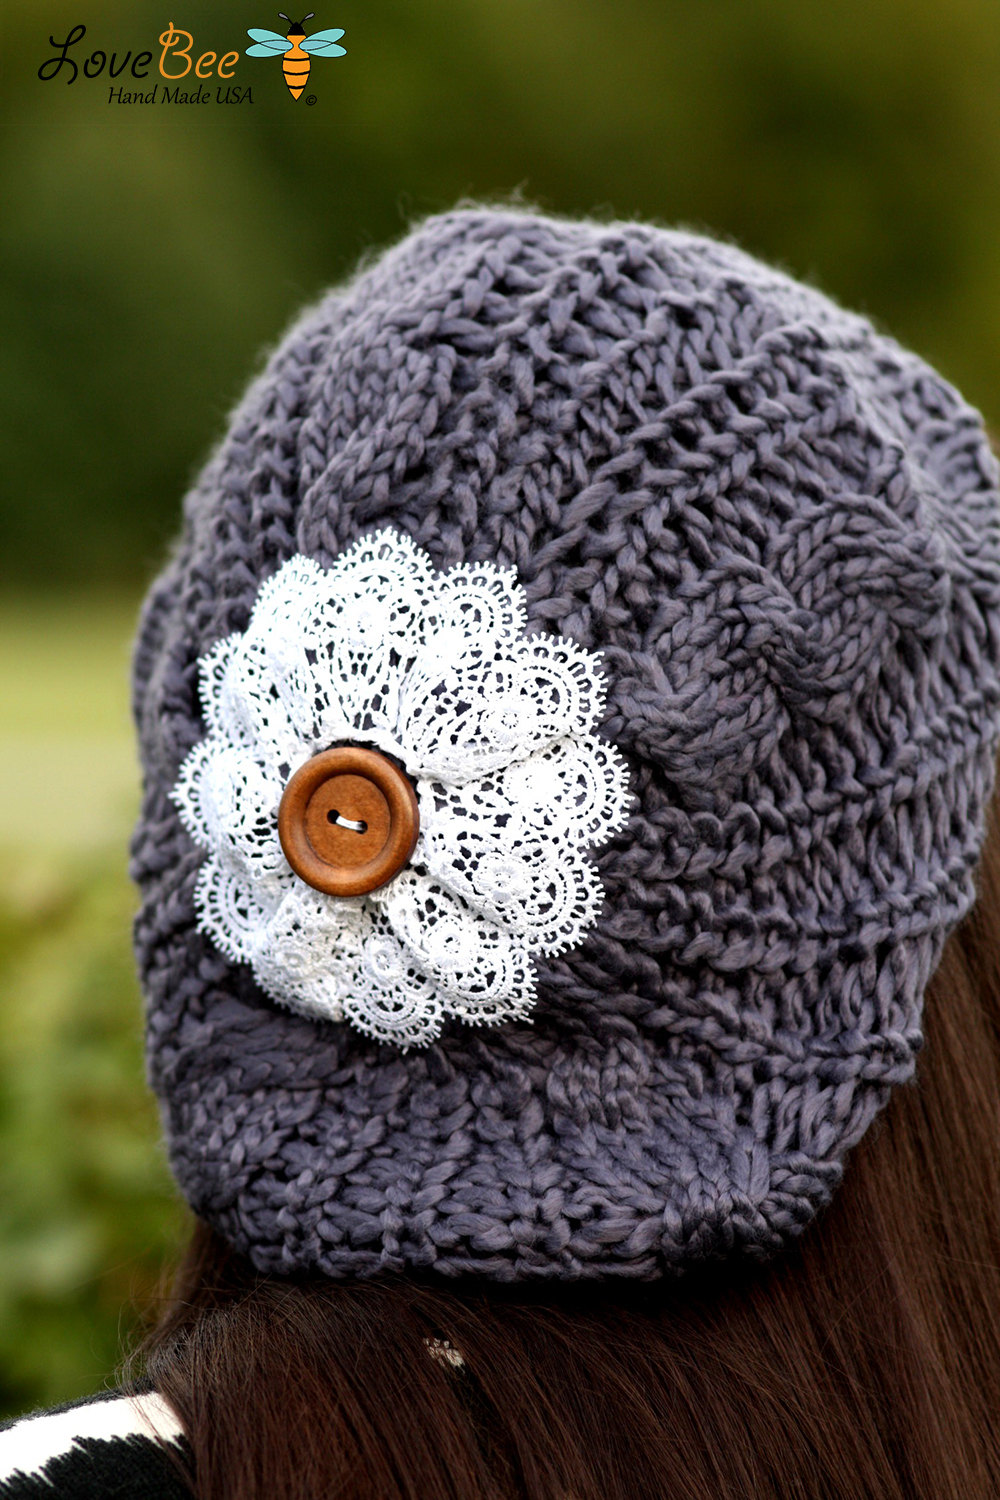 Beanie Hat- Charcoal Grey, Large Lace Flower, Wood Button, Cable Knit, Knitted, Crochet, White Lace, Christmas Gift.